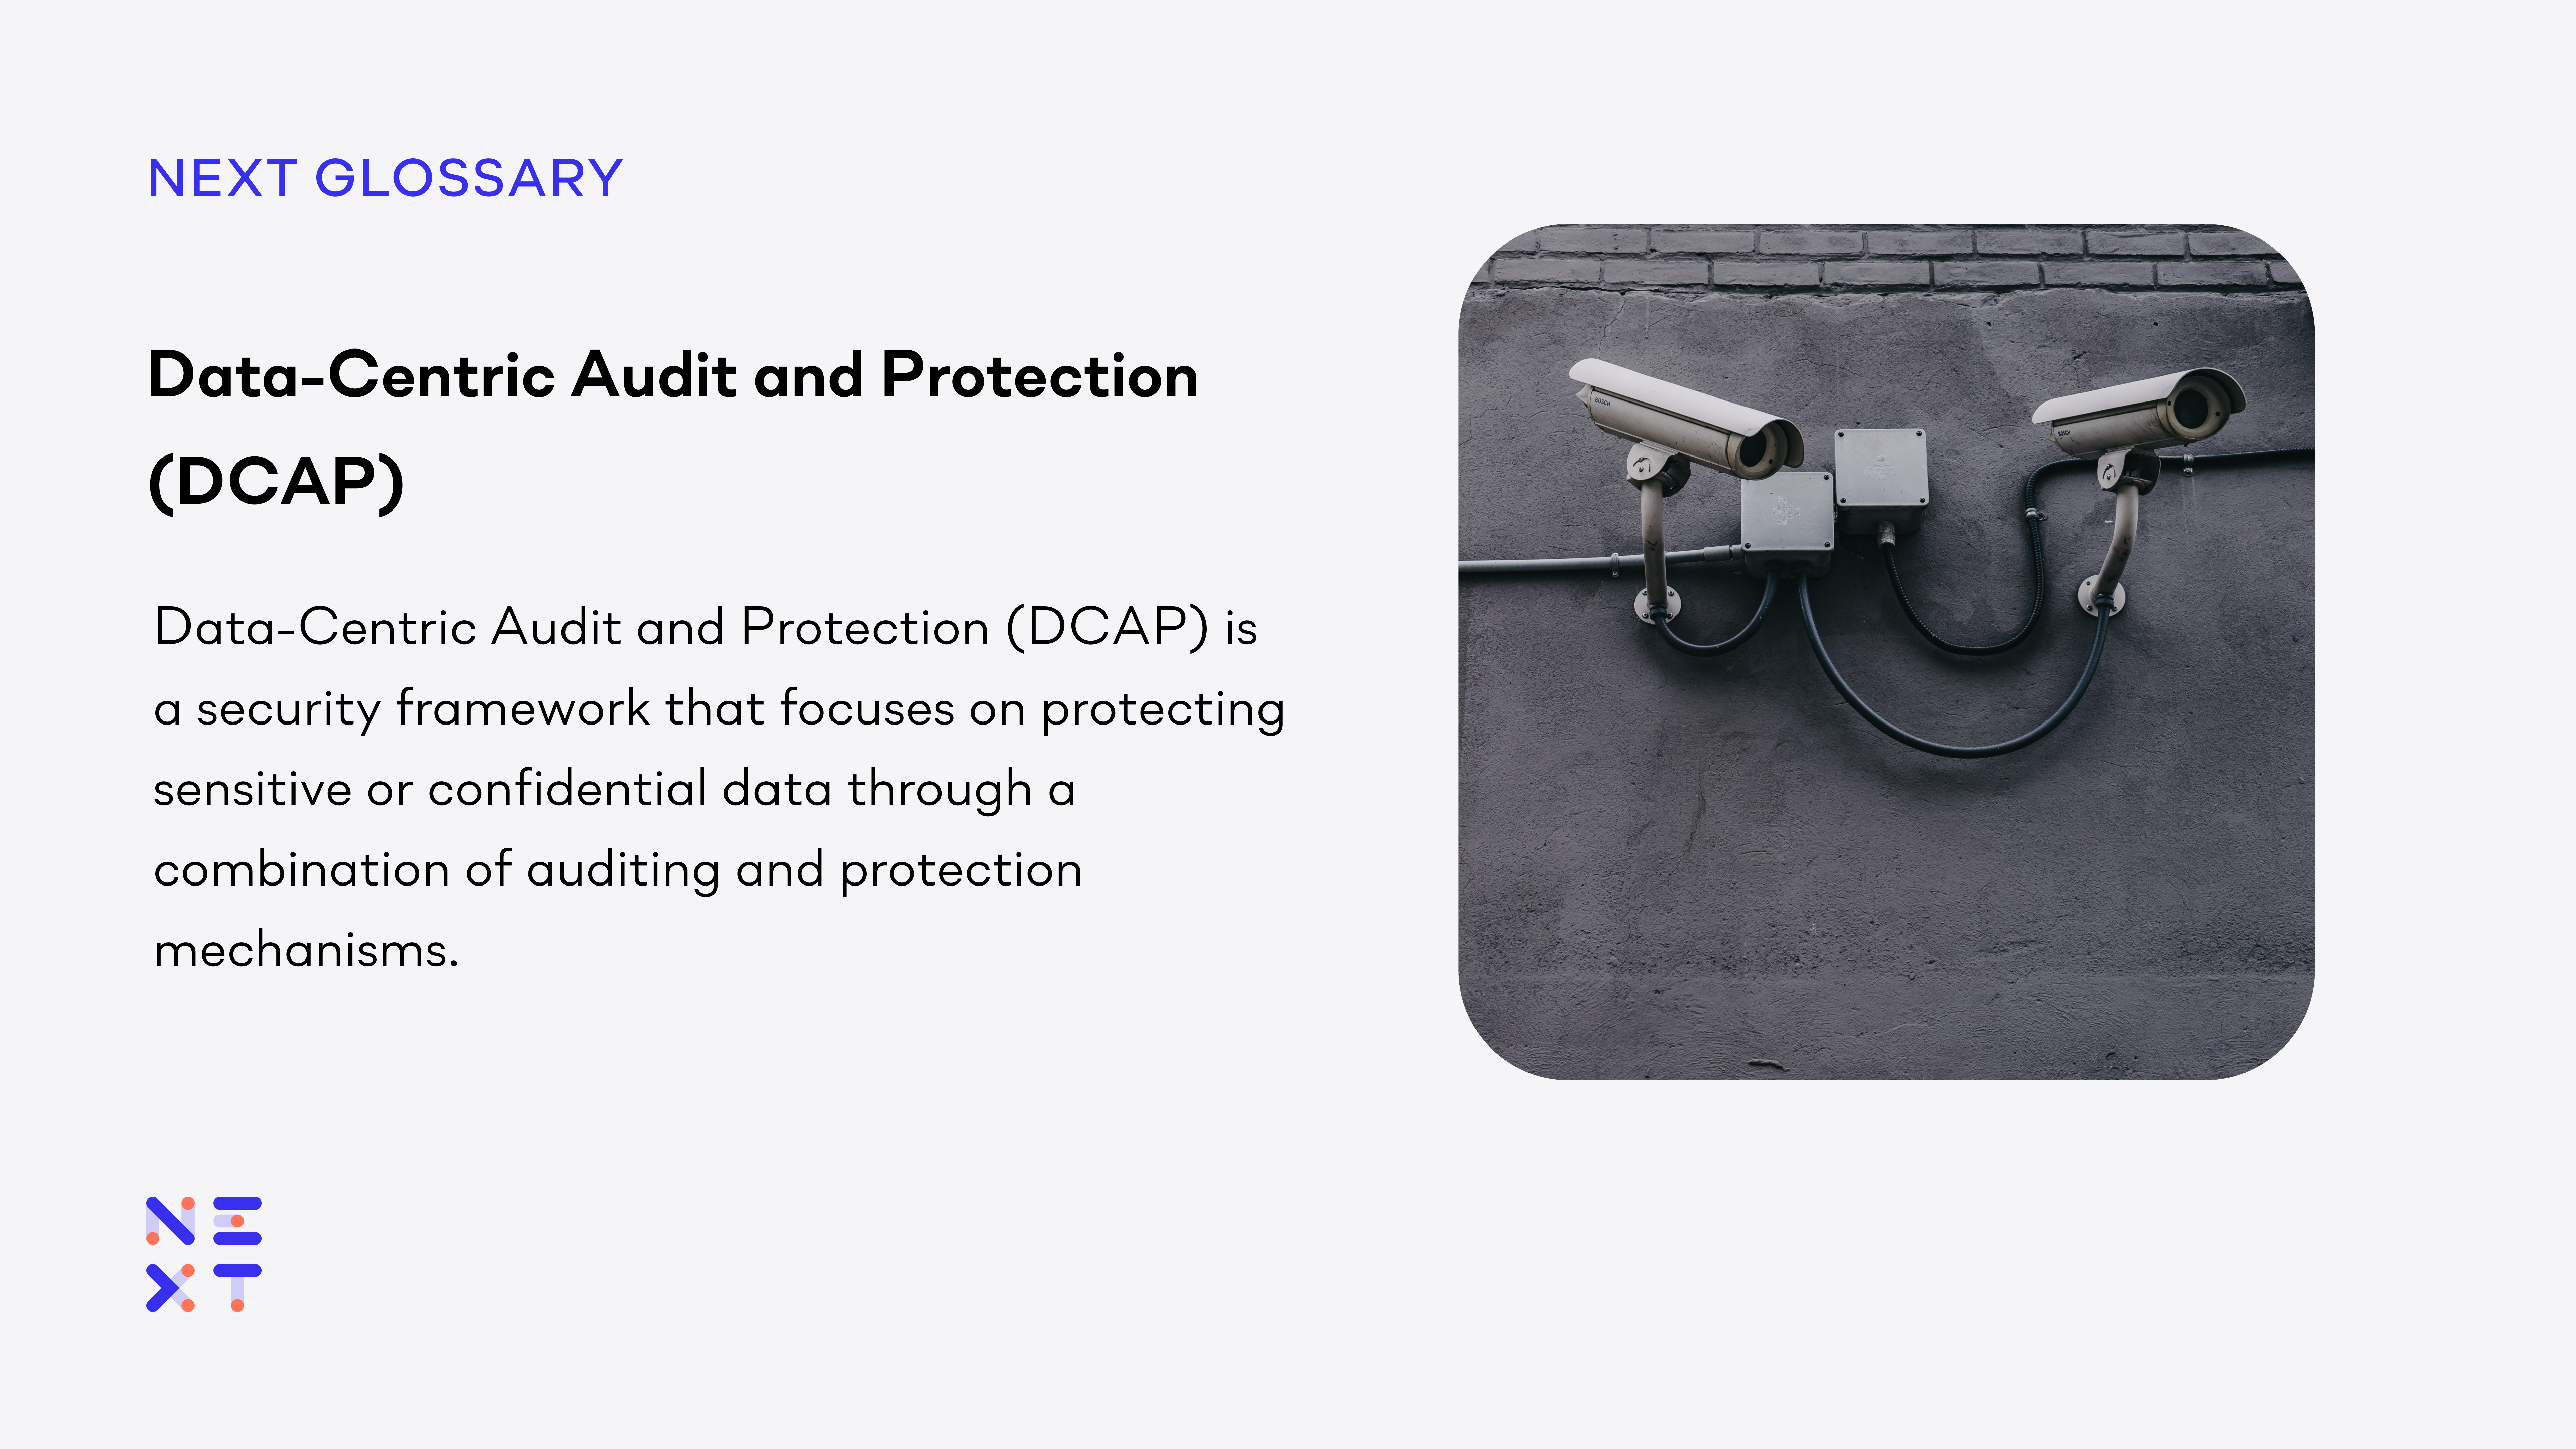 Data-Centric Audit and Protection (DCAP)